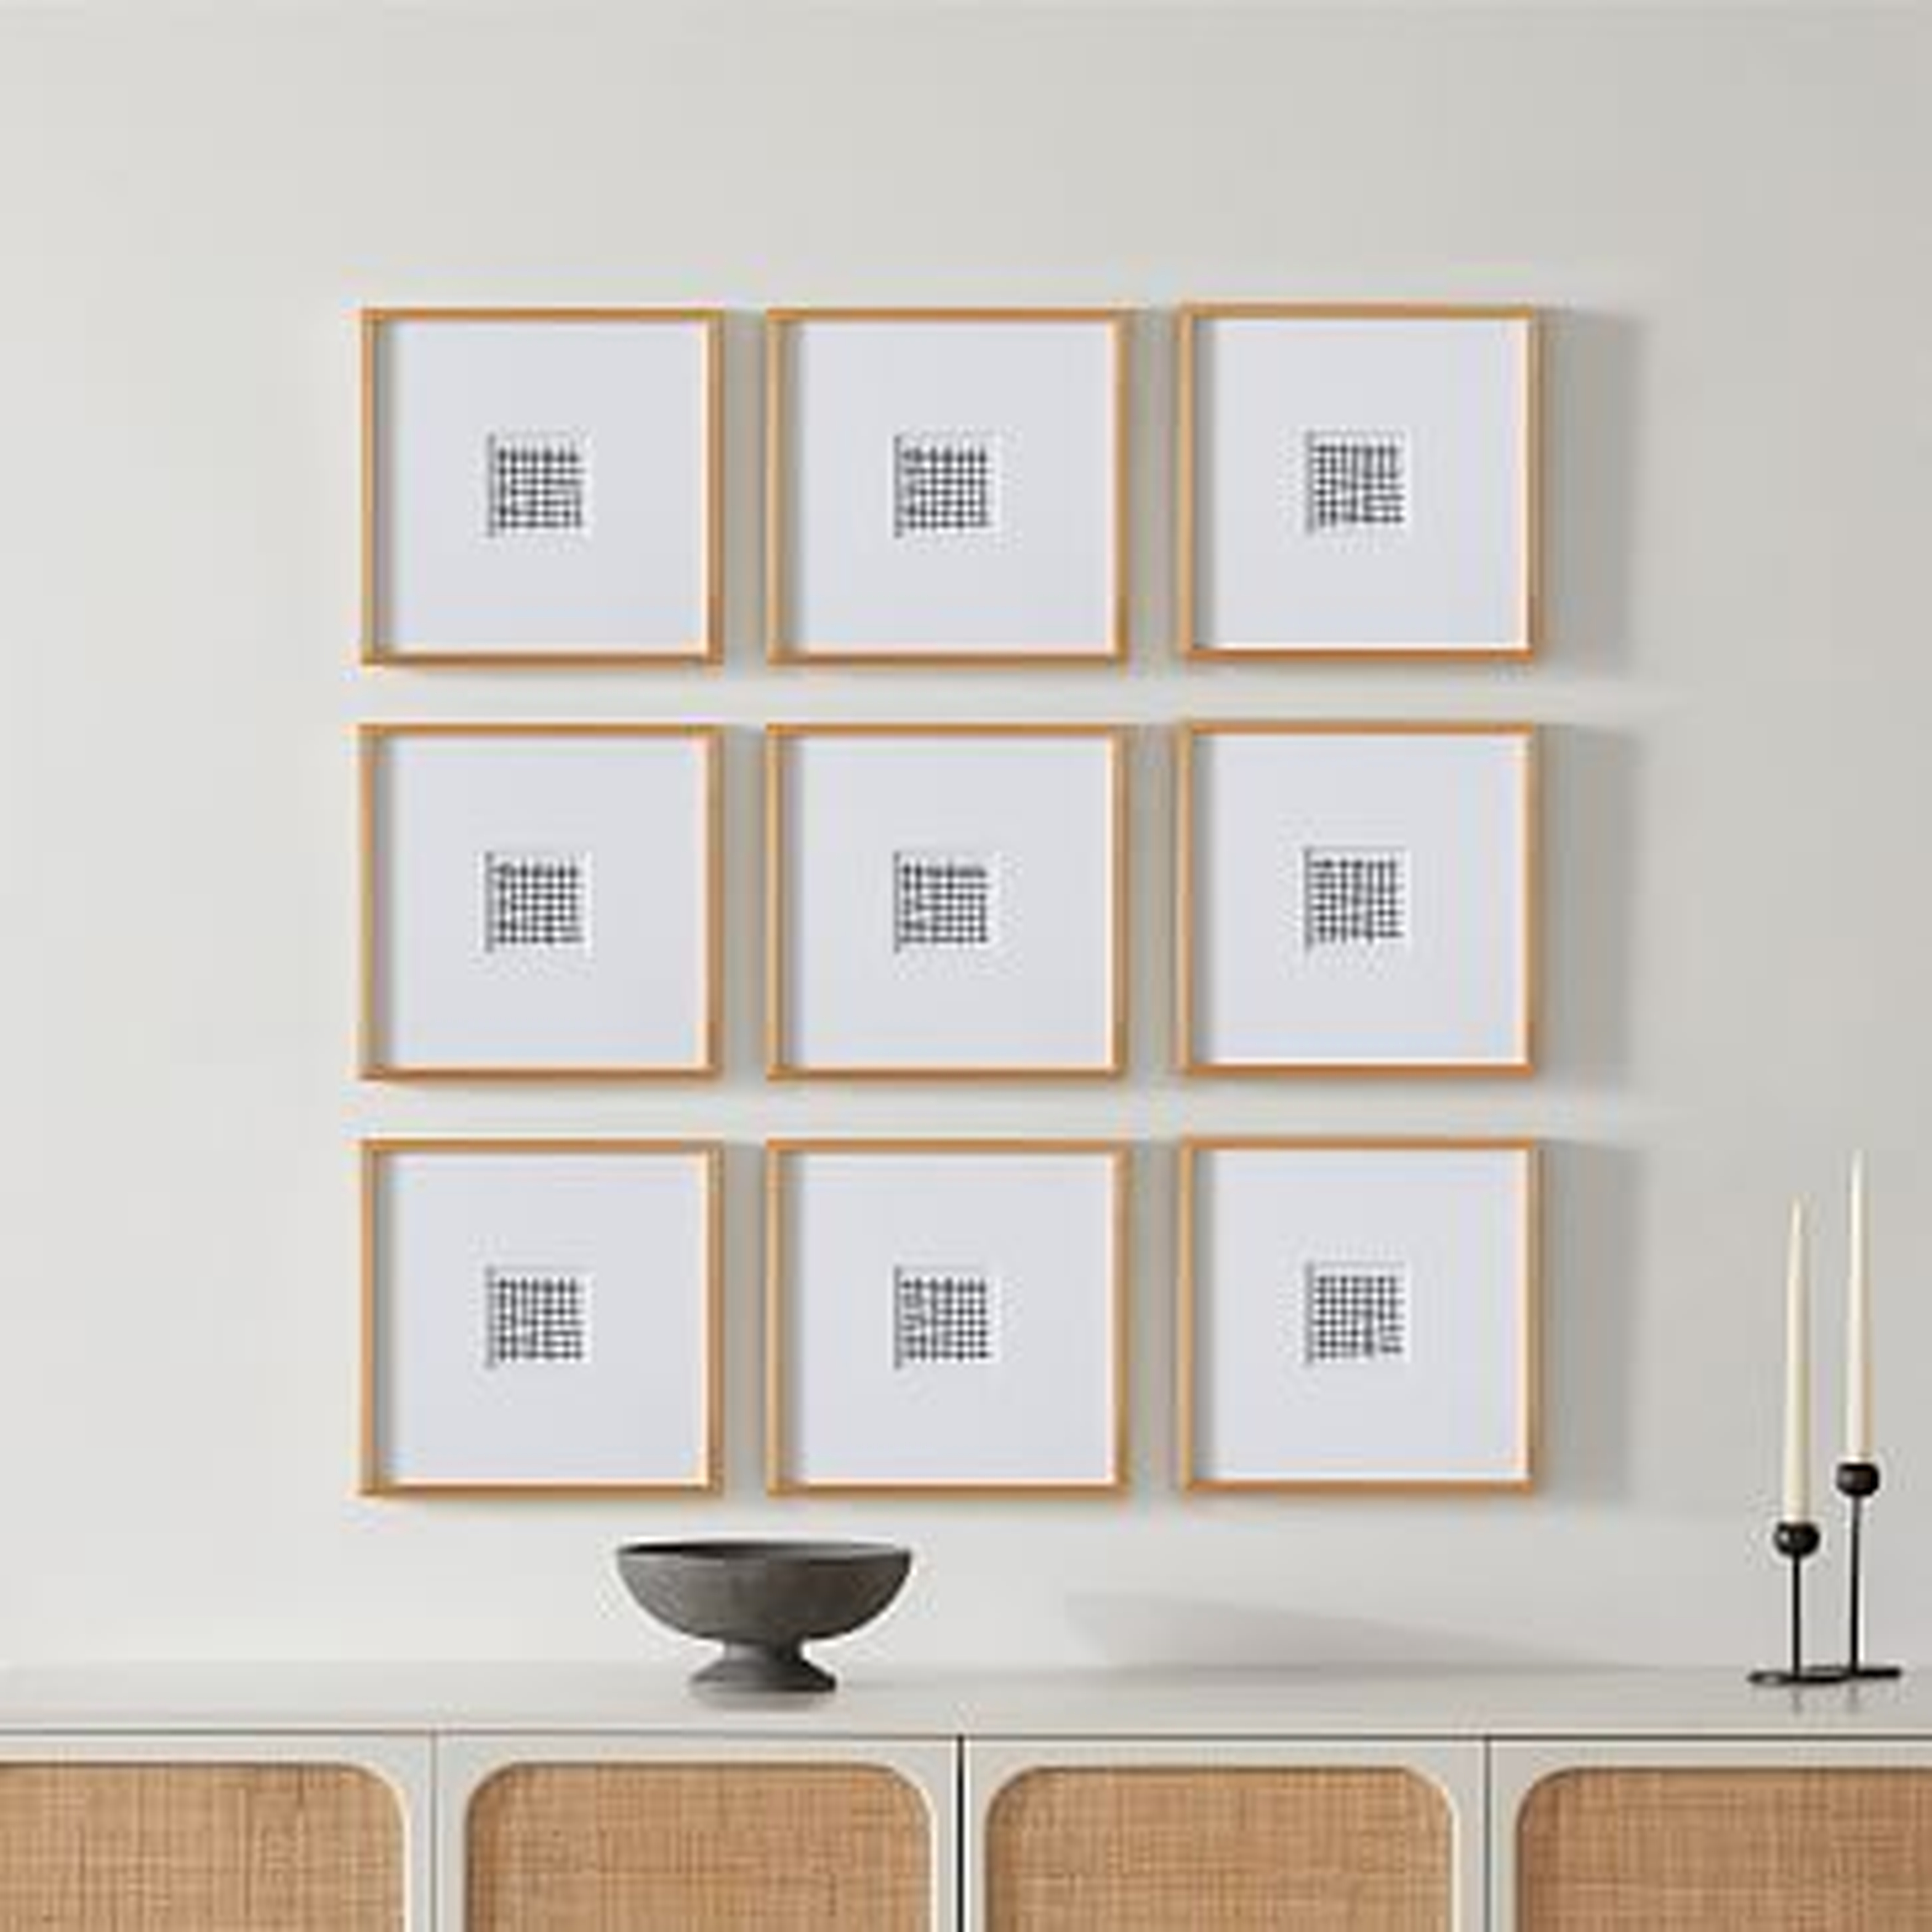 Wood Gallery Frames Square, Wheat, 12x12 Set of 9 - West Elm